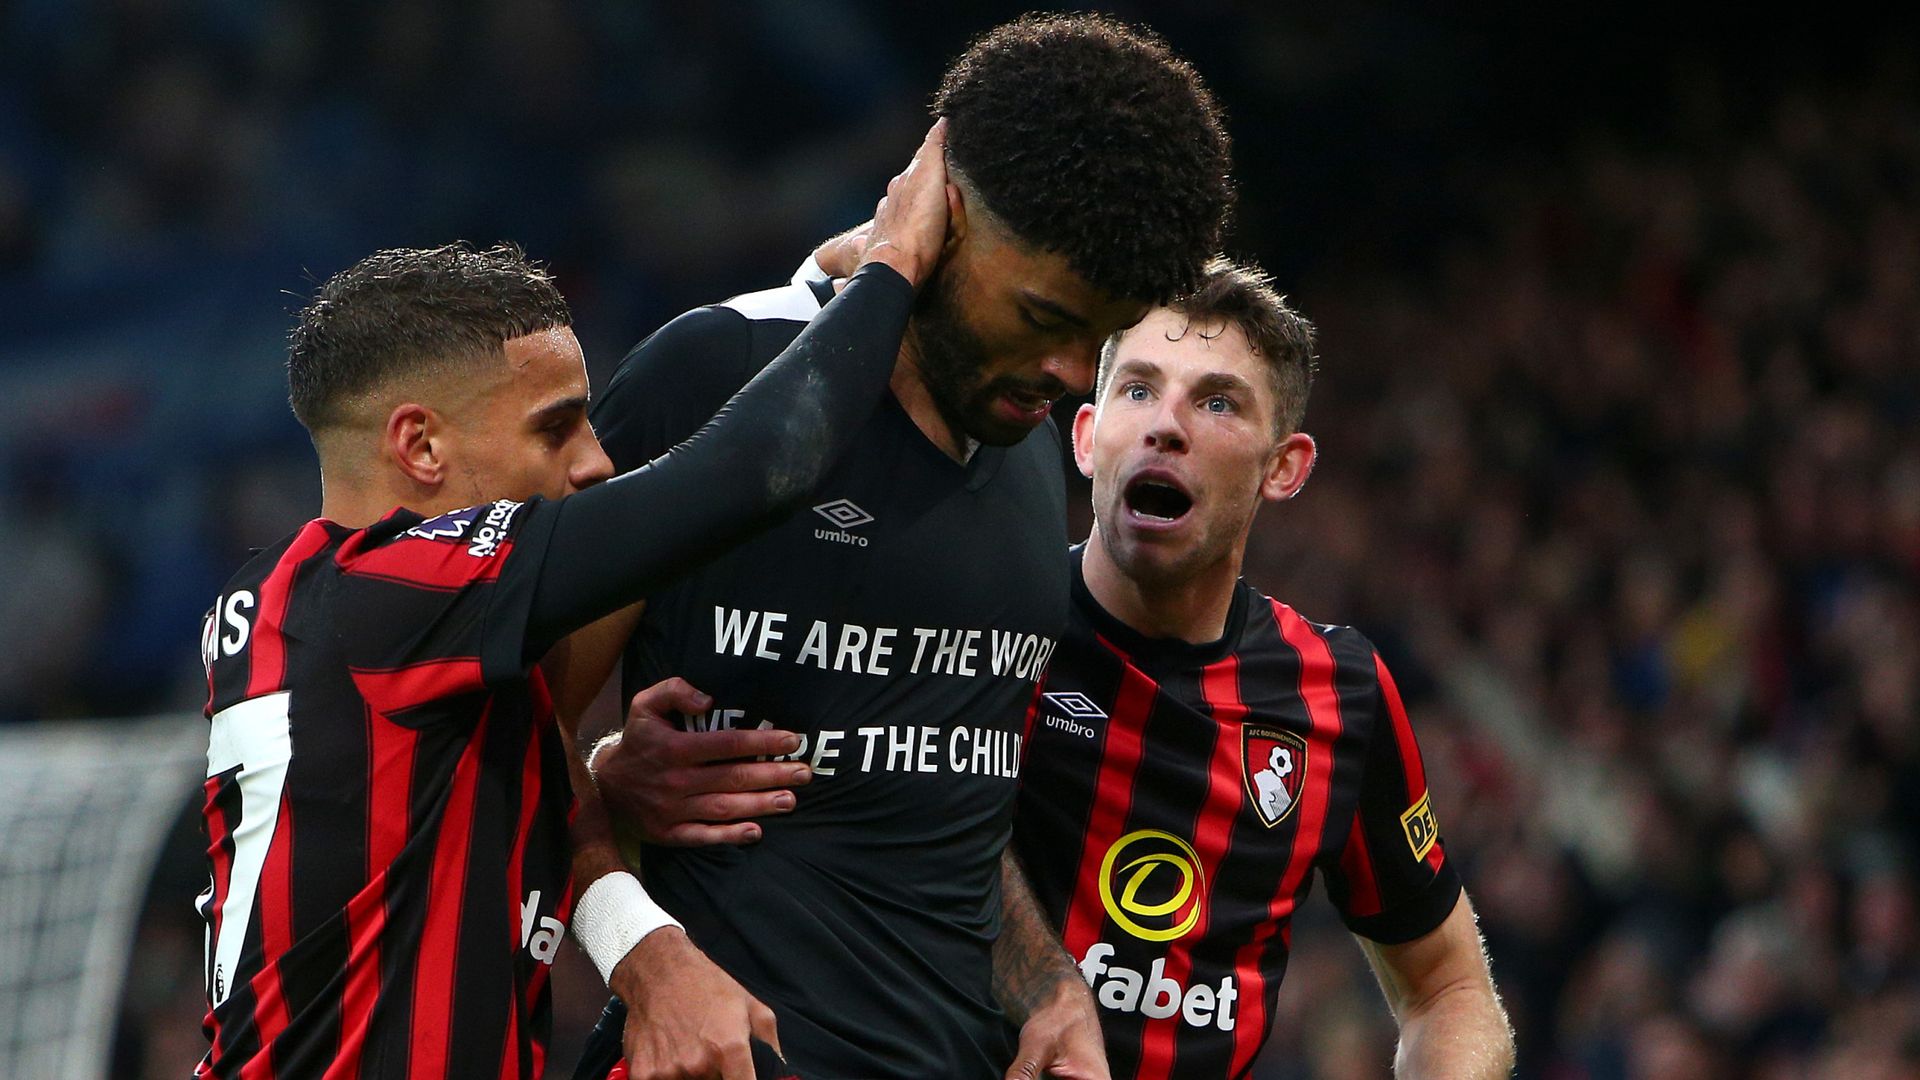 Billing's lob gives Bournemouth first PL win amid late VAR drama